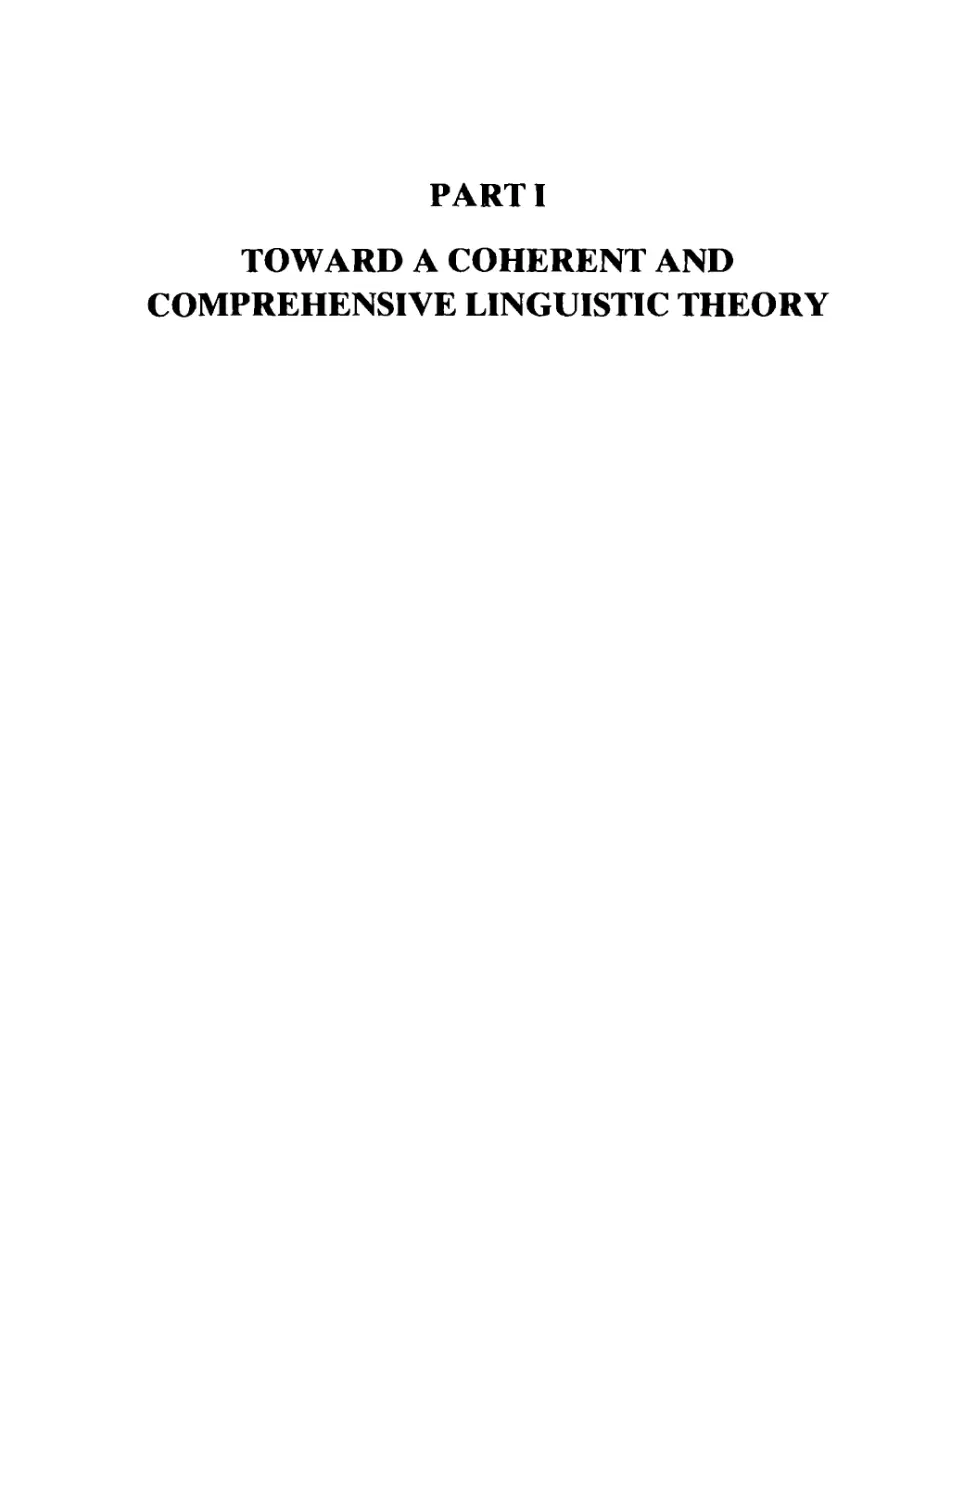 PART I. TOWARD A COHERENT AND COMPREHENSIVE LINGUISTIC THEORY